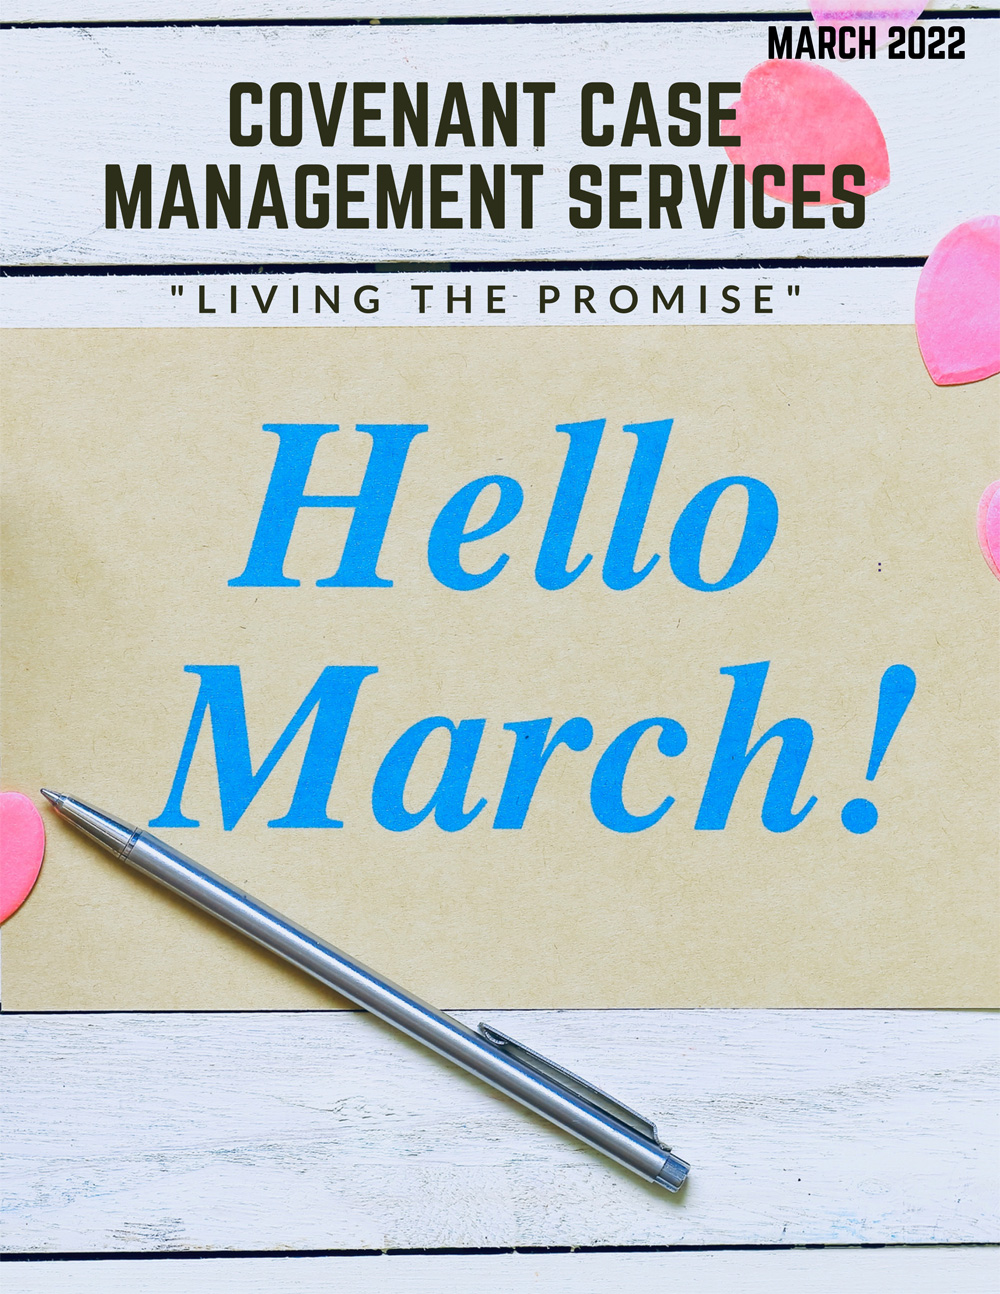 March 2022 Newsletter from Covenant Case Management Services